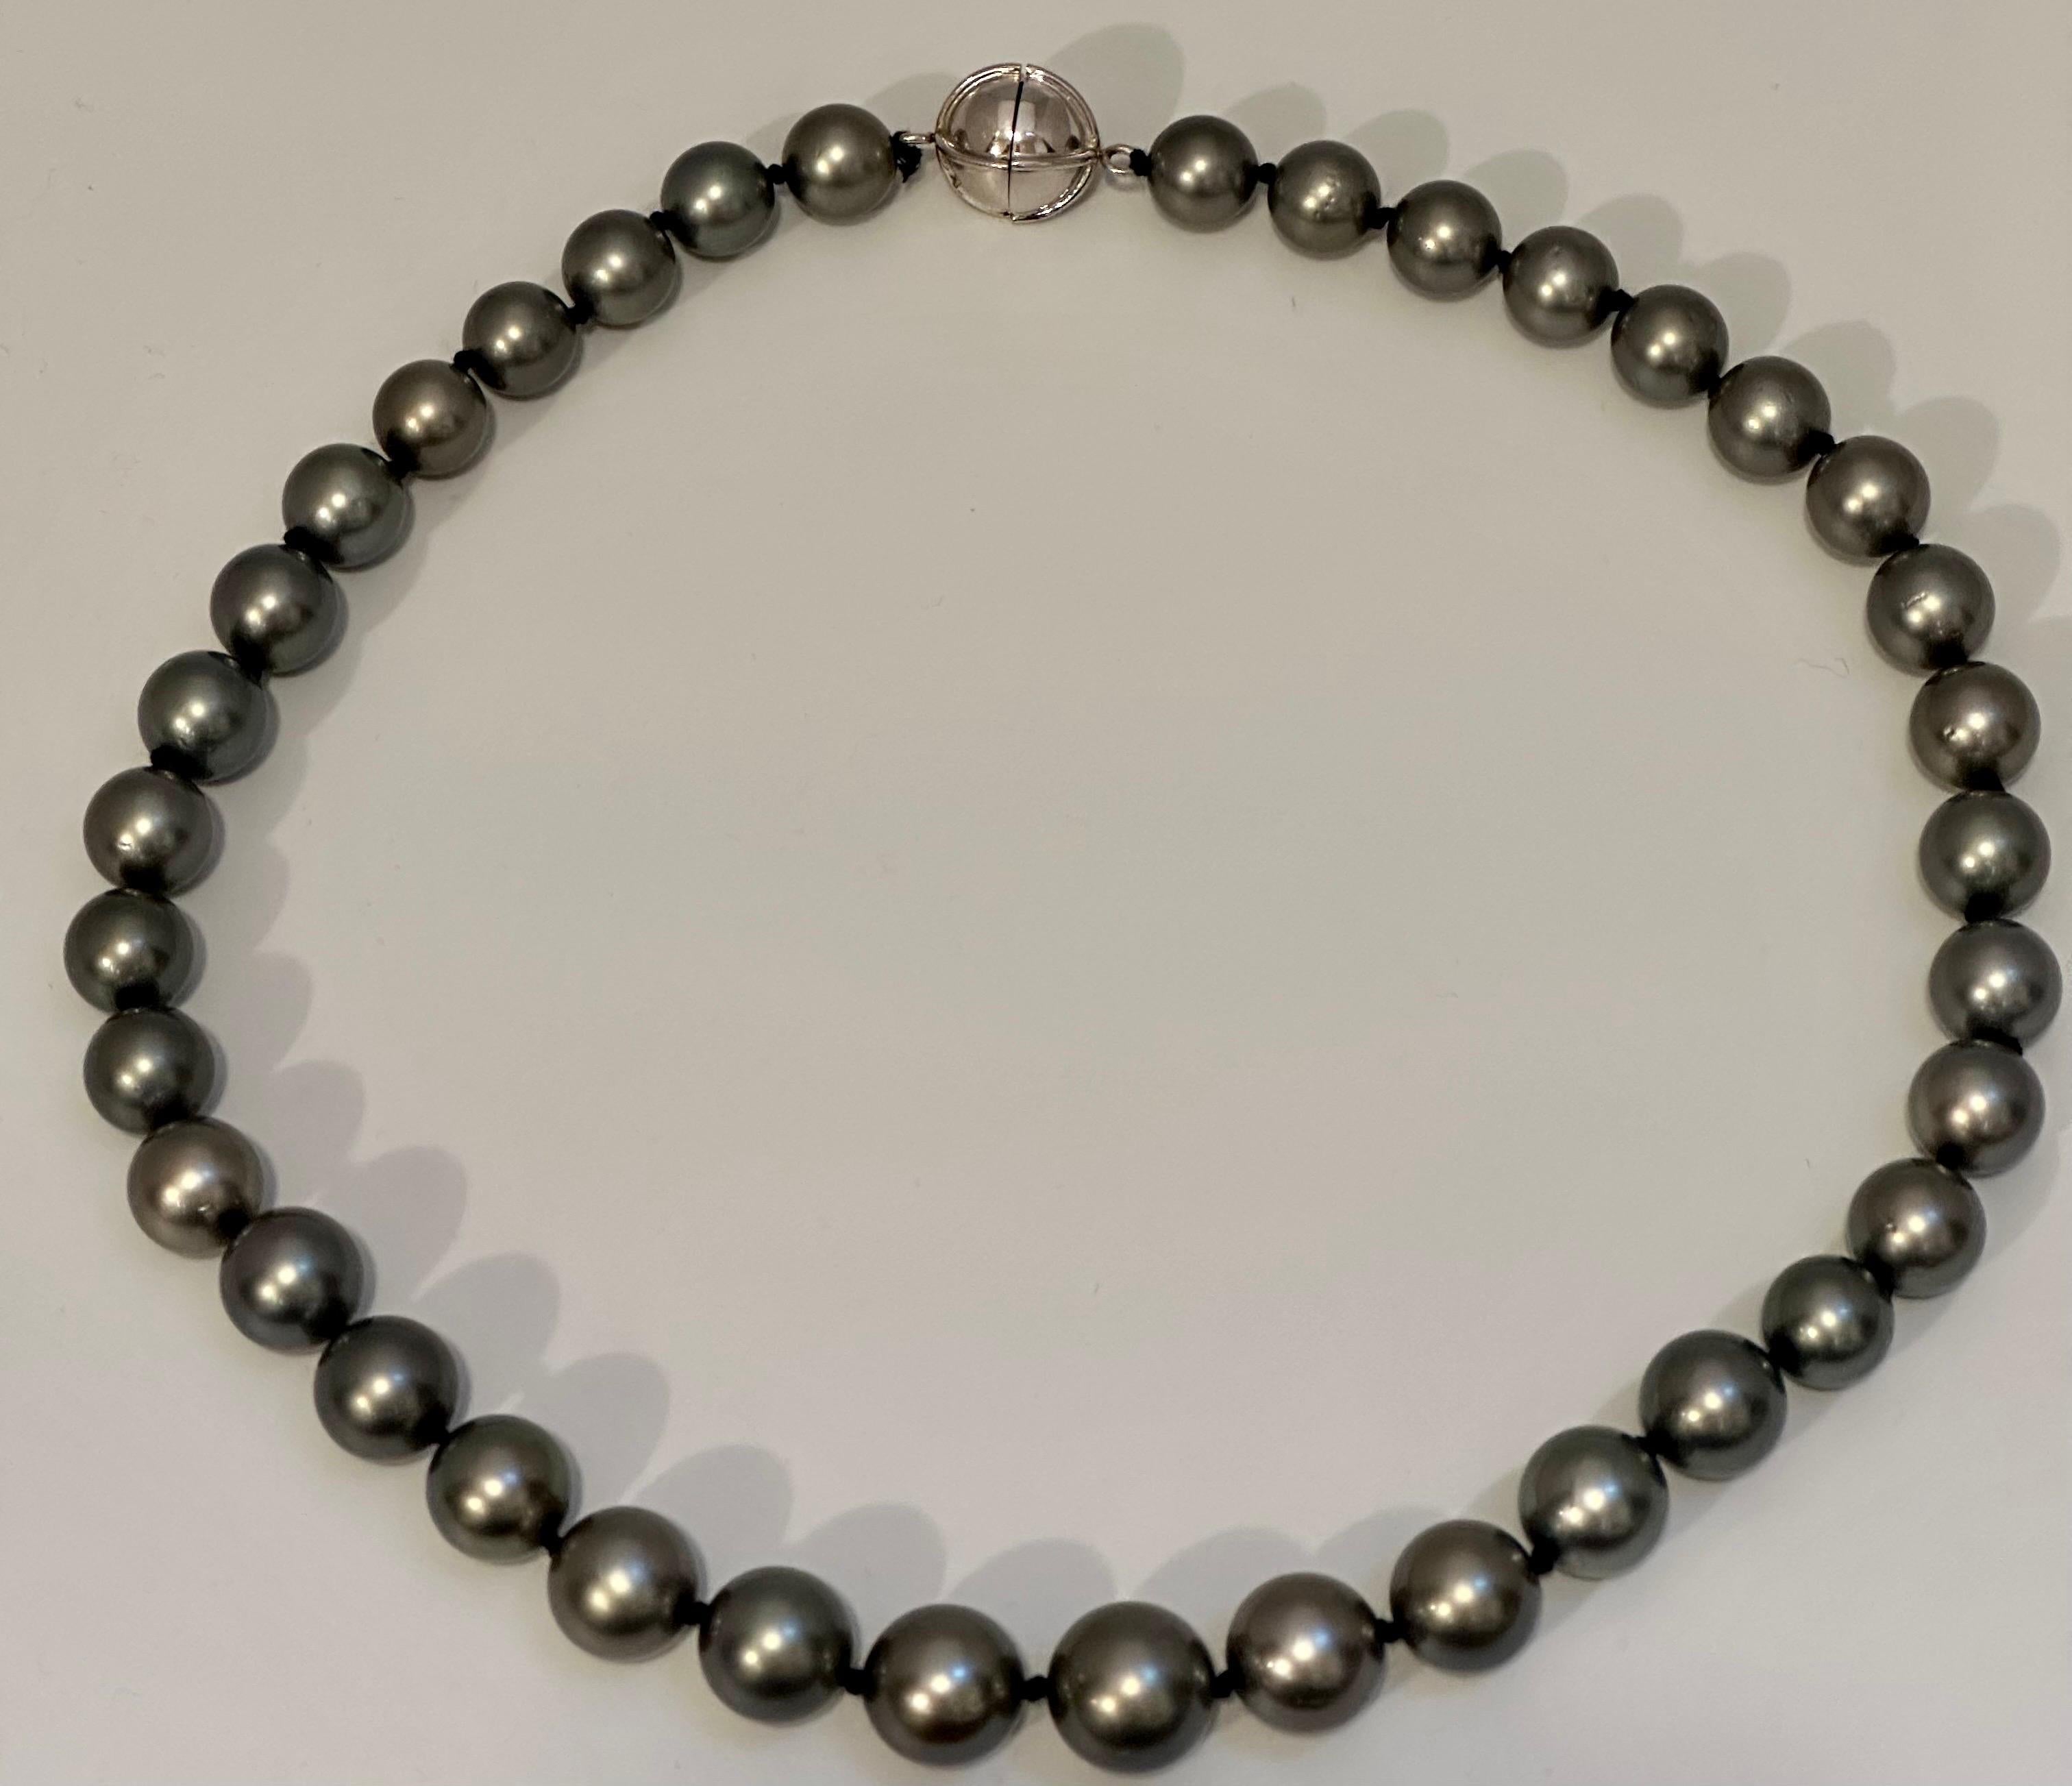 11-15 mm Tahitian Black Graduating Pearls Strand Necklace, Estate, WG For Sale 3